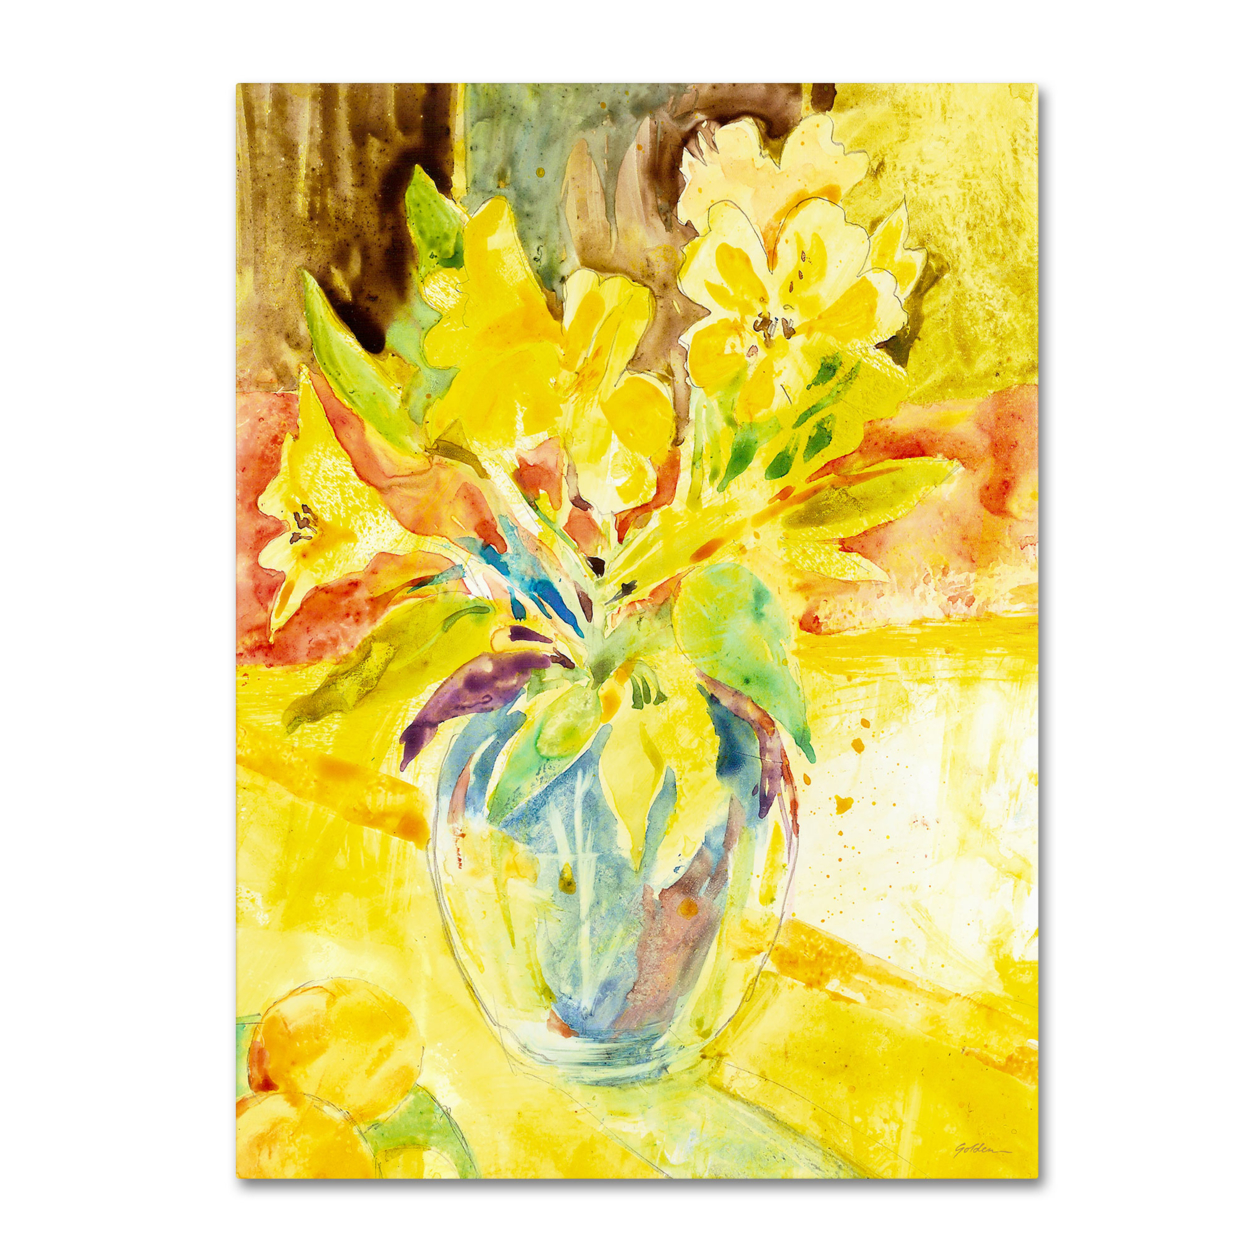 Sheila Golden 'Vase With Yellow Flowers' Canvas Art 18 X 24